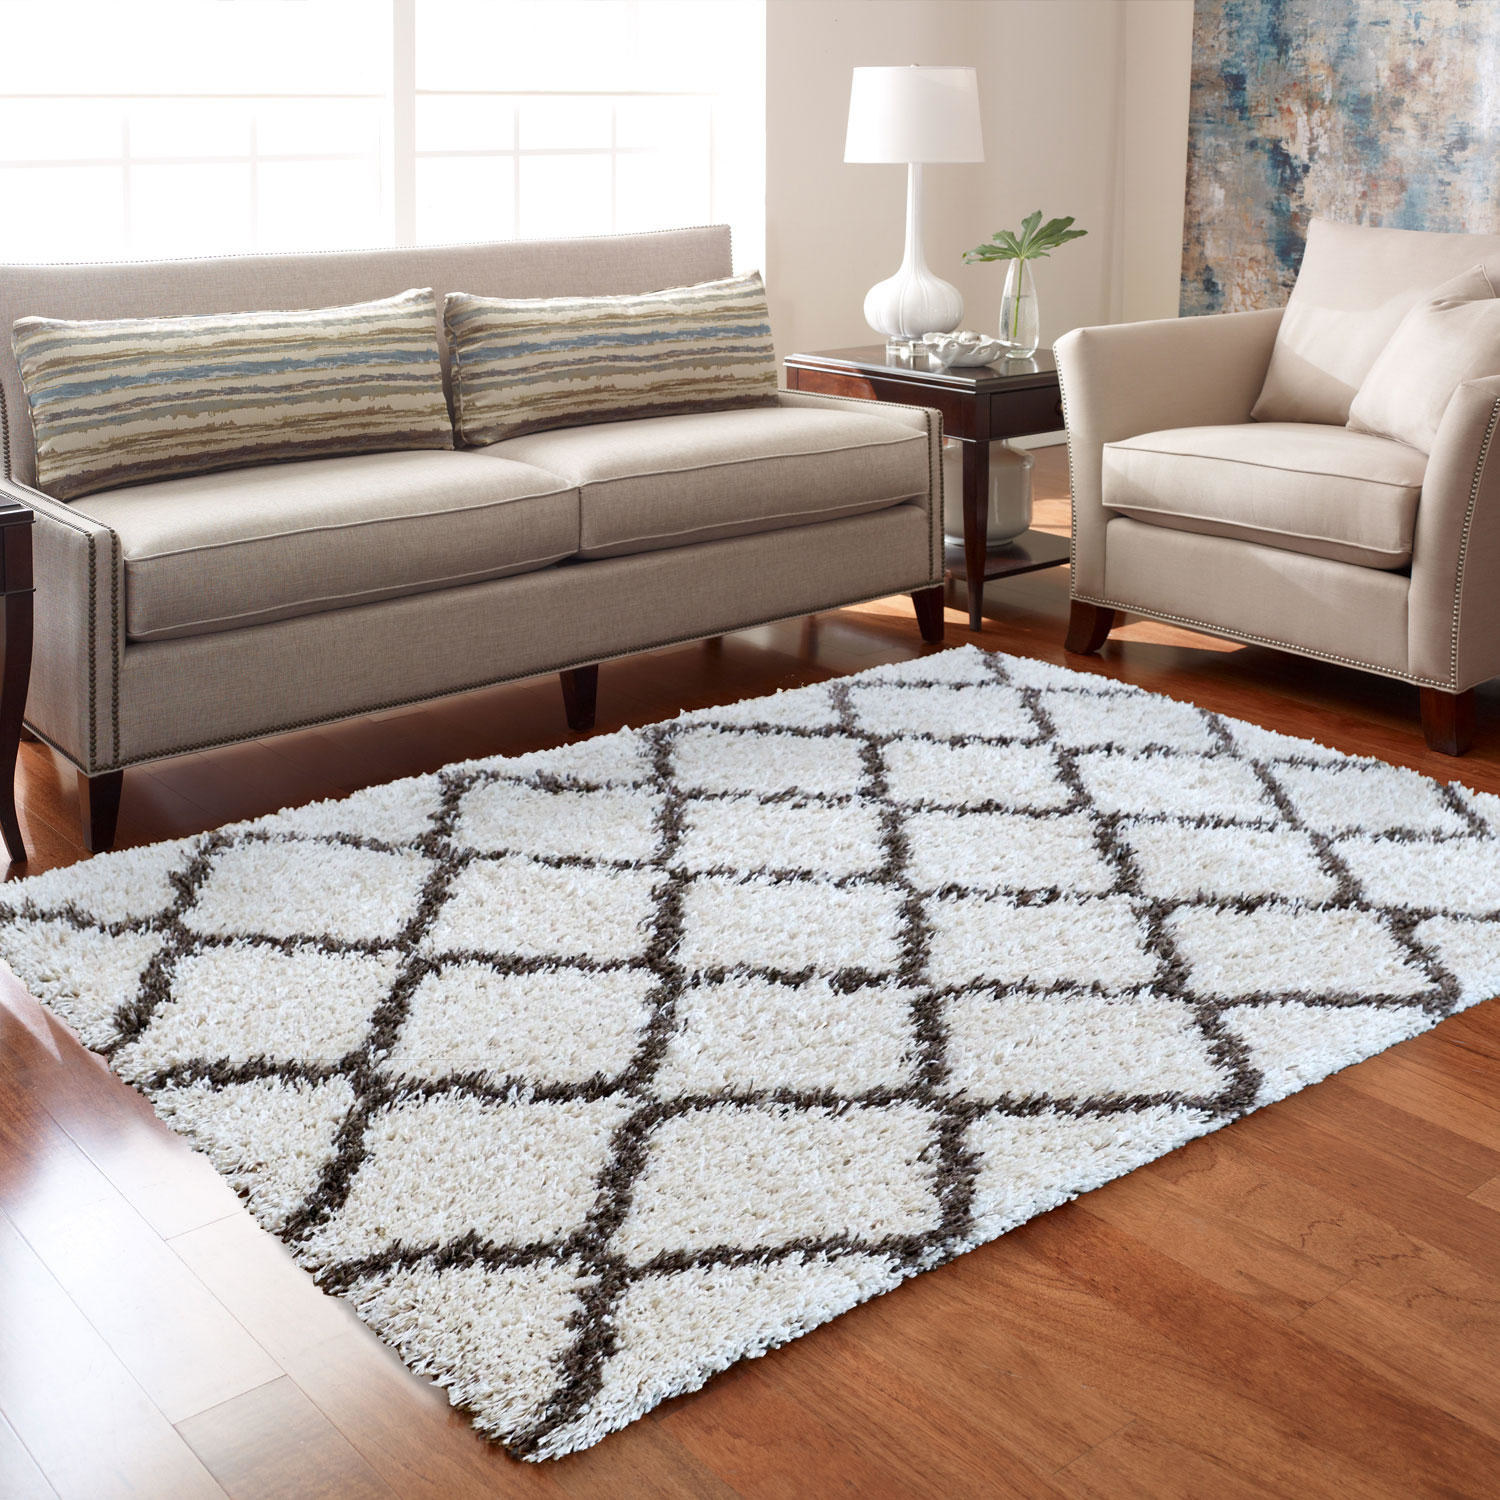 The rug in a living room